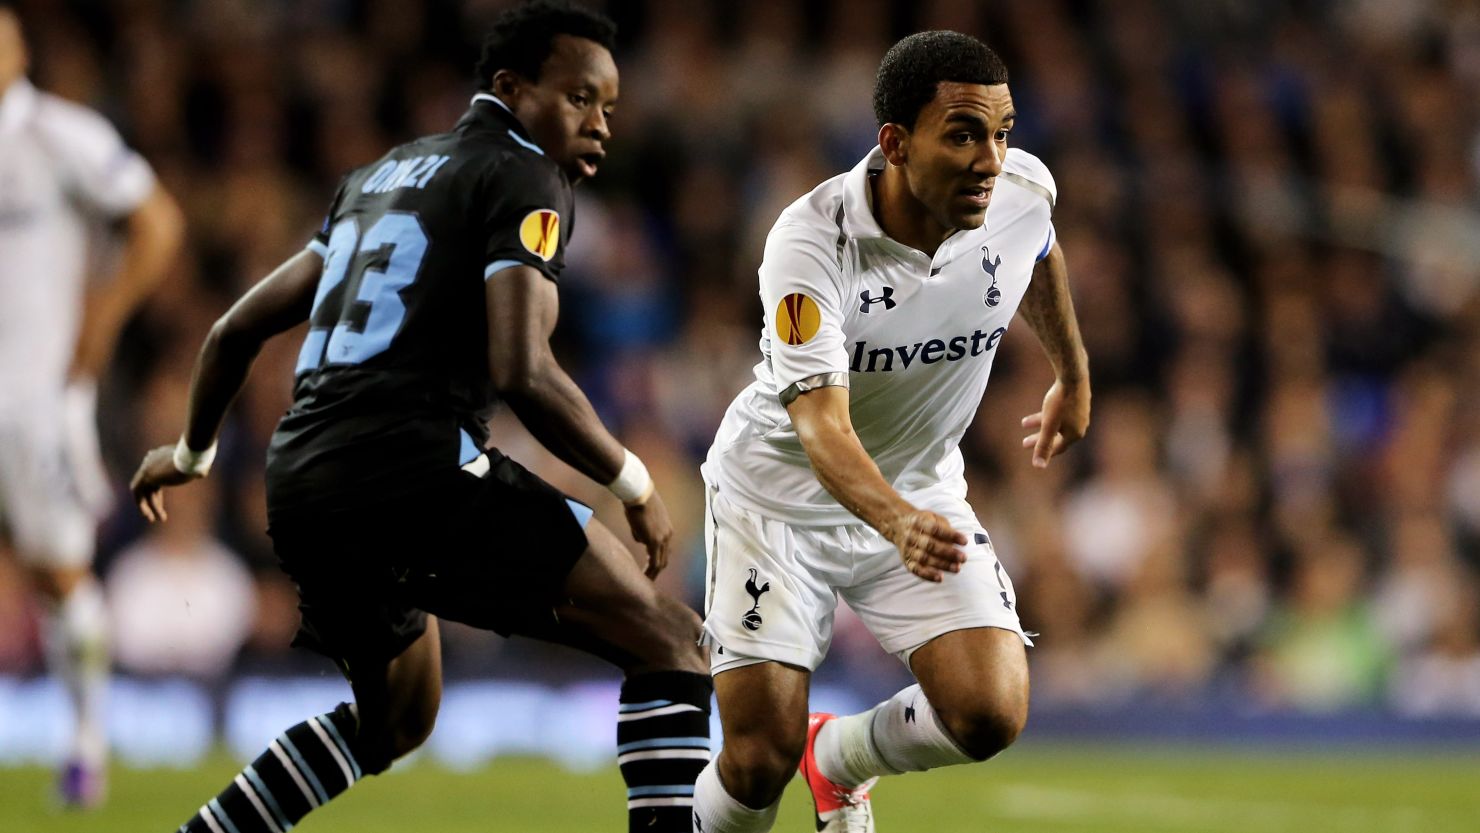 Tottenham's Aaron Lennon captained Tottenham against Lazio but was unable to find a way past the Italian defence.